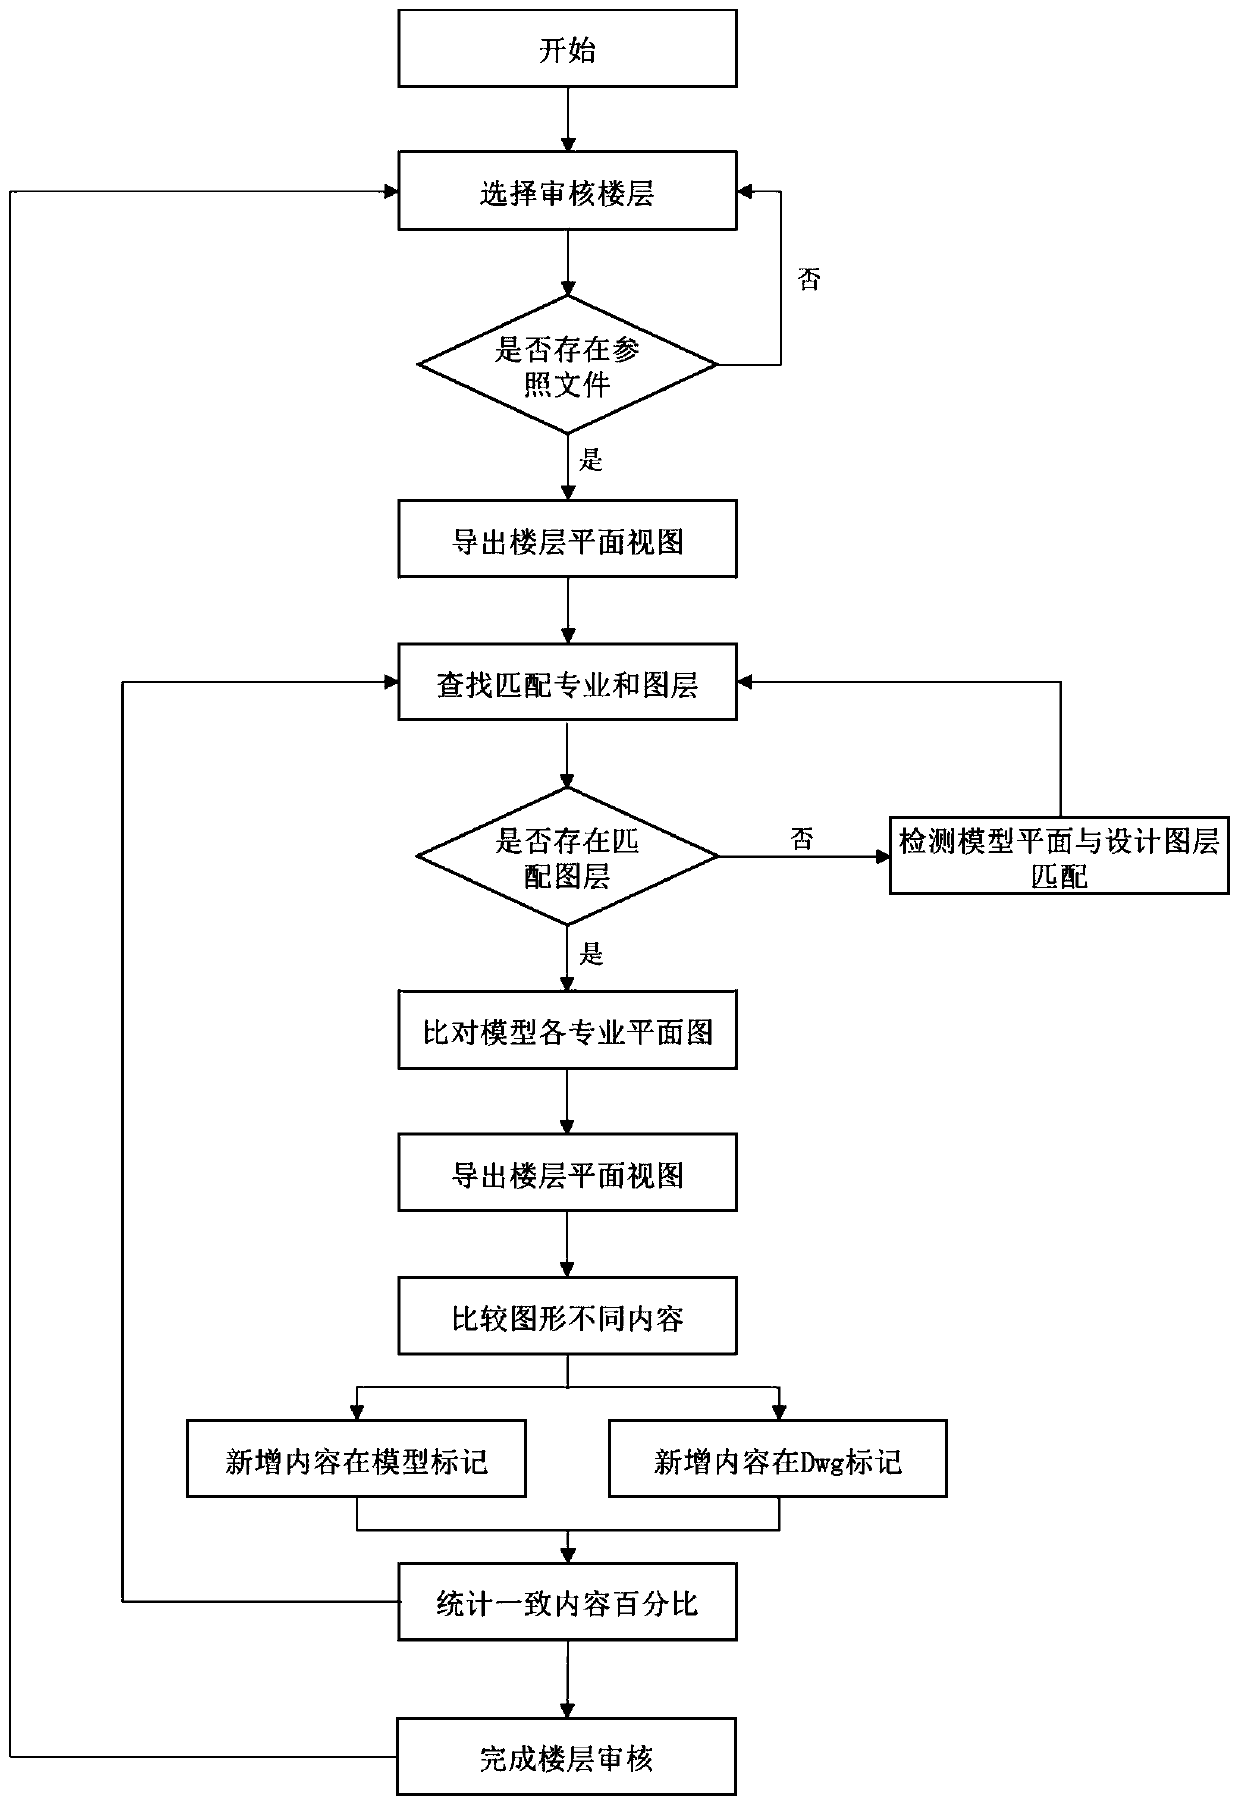 Automatic inspection method for consistency of building model and design drawing